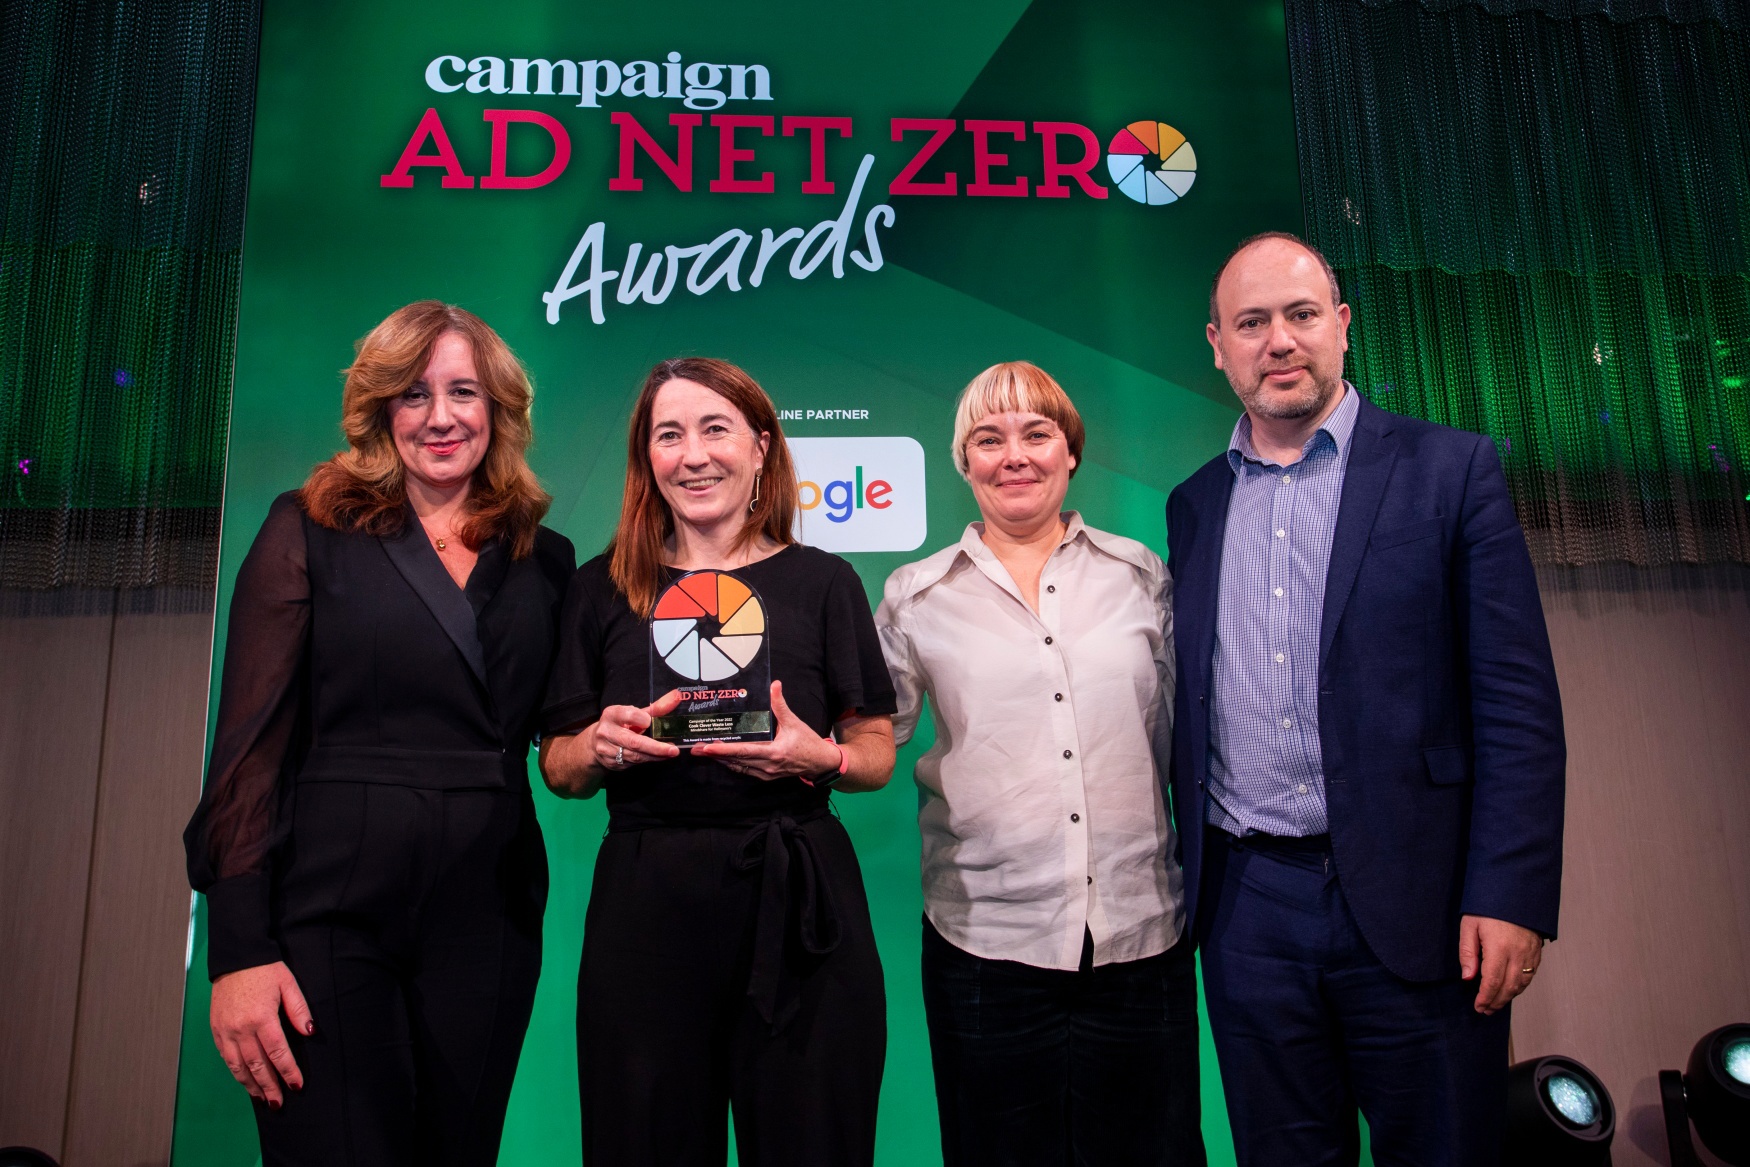 Hellmann’s and Mindshare won Campaign of the Year at the recent Campaign Ad Net Zero Awards